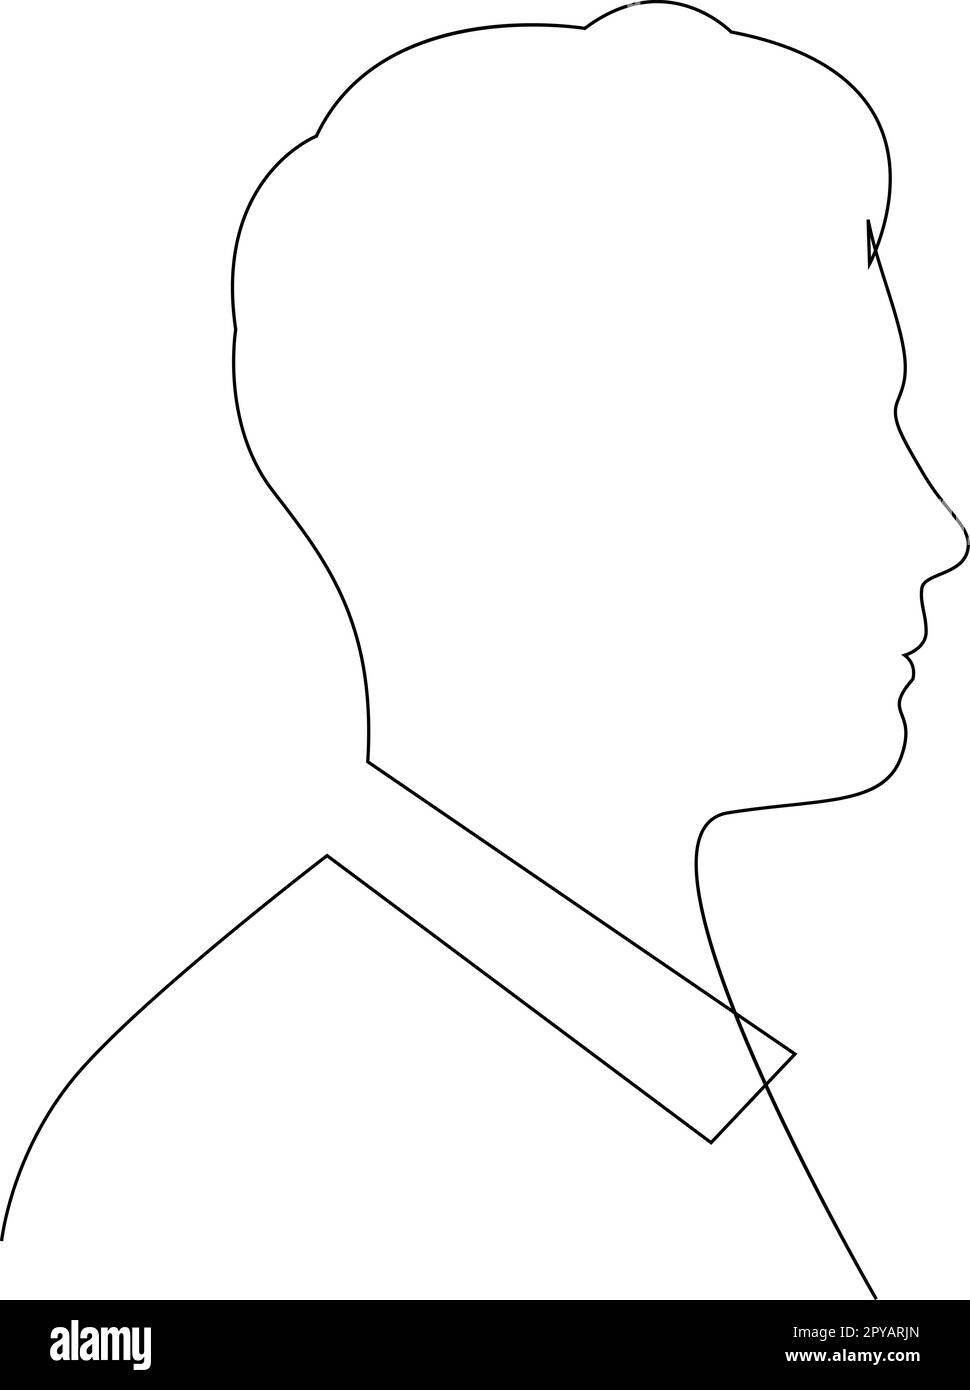 face outline drawing